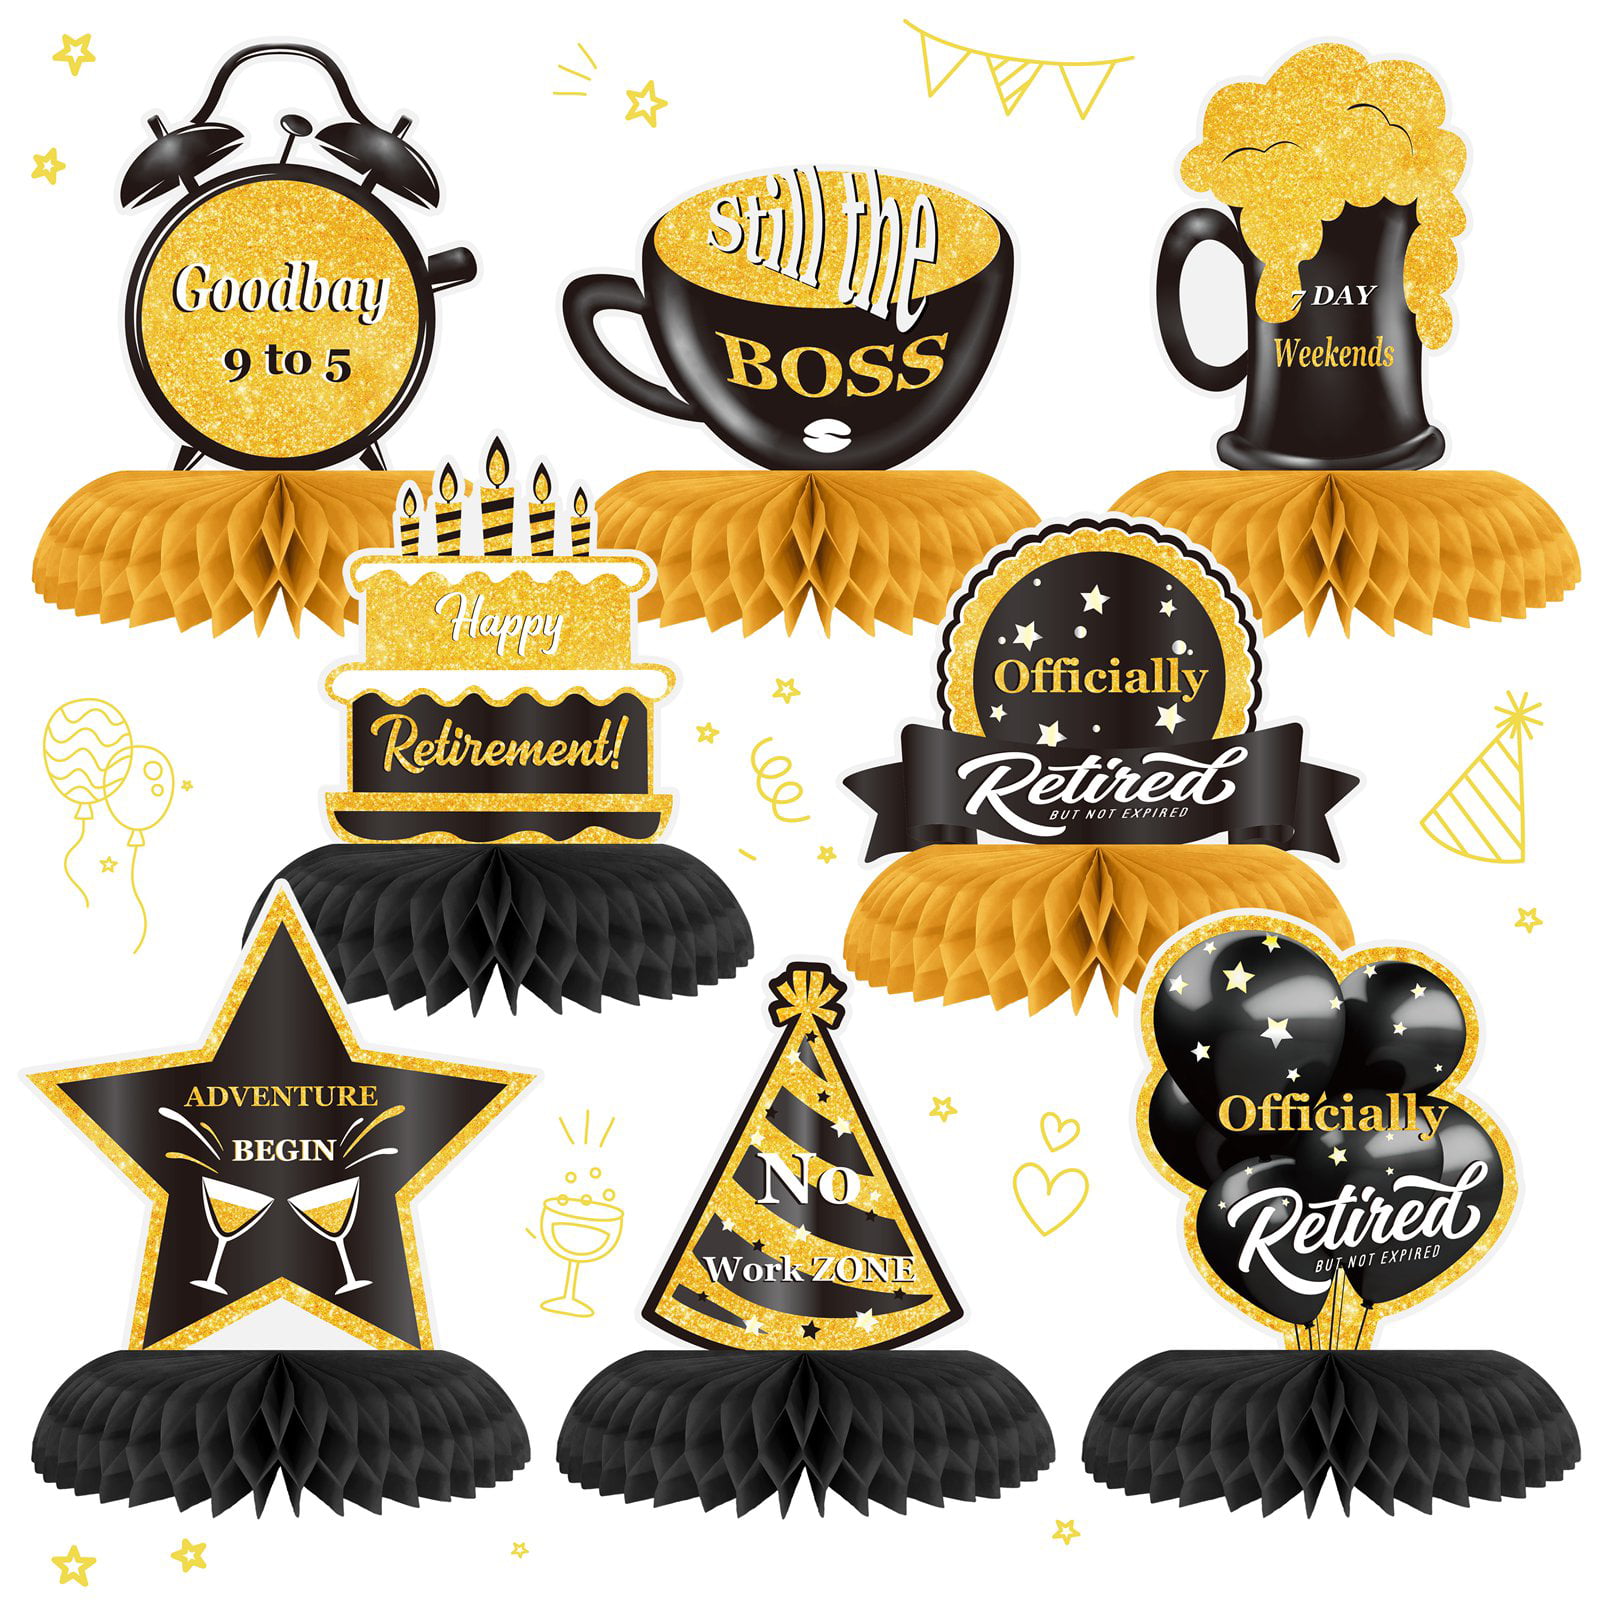 Details about   Officially Retired Hanging Swirl Decorations Happy Retirement Party Supplies 